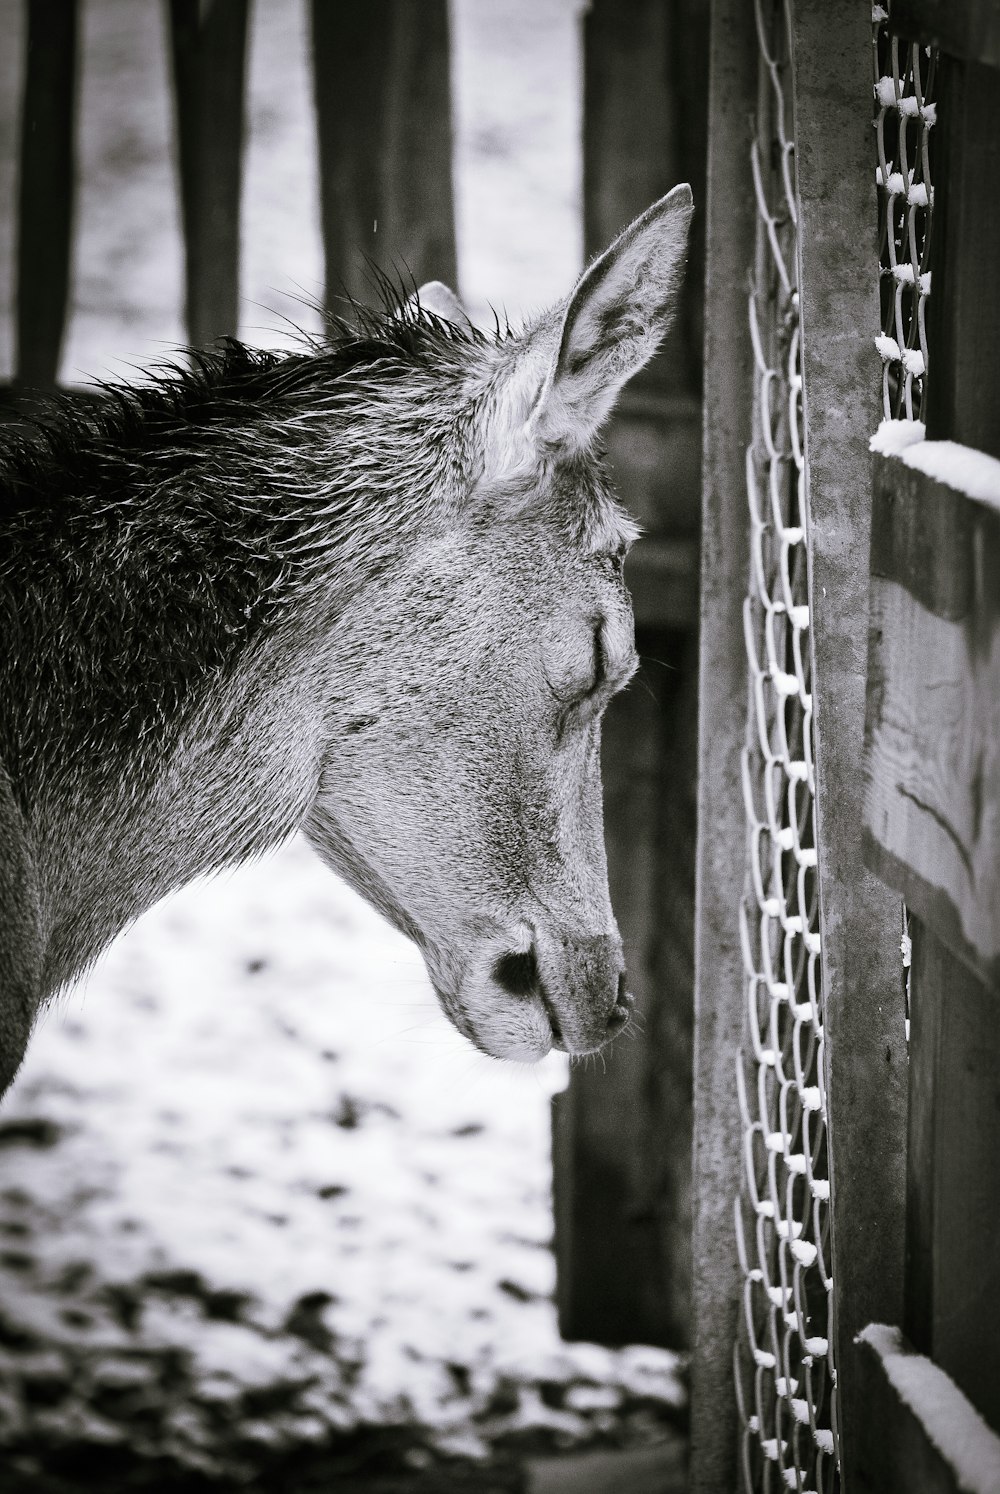 grayscale photo of horse in cage